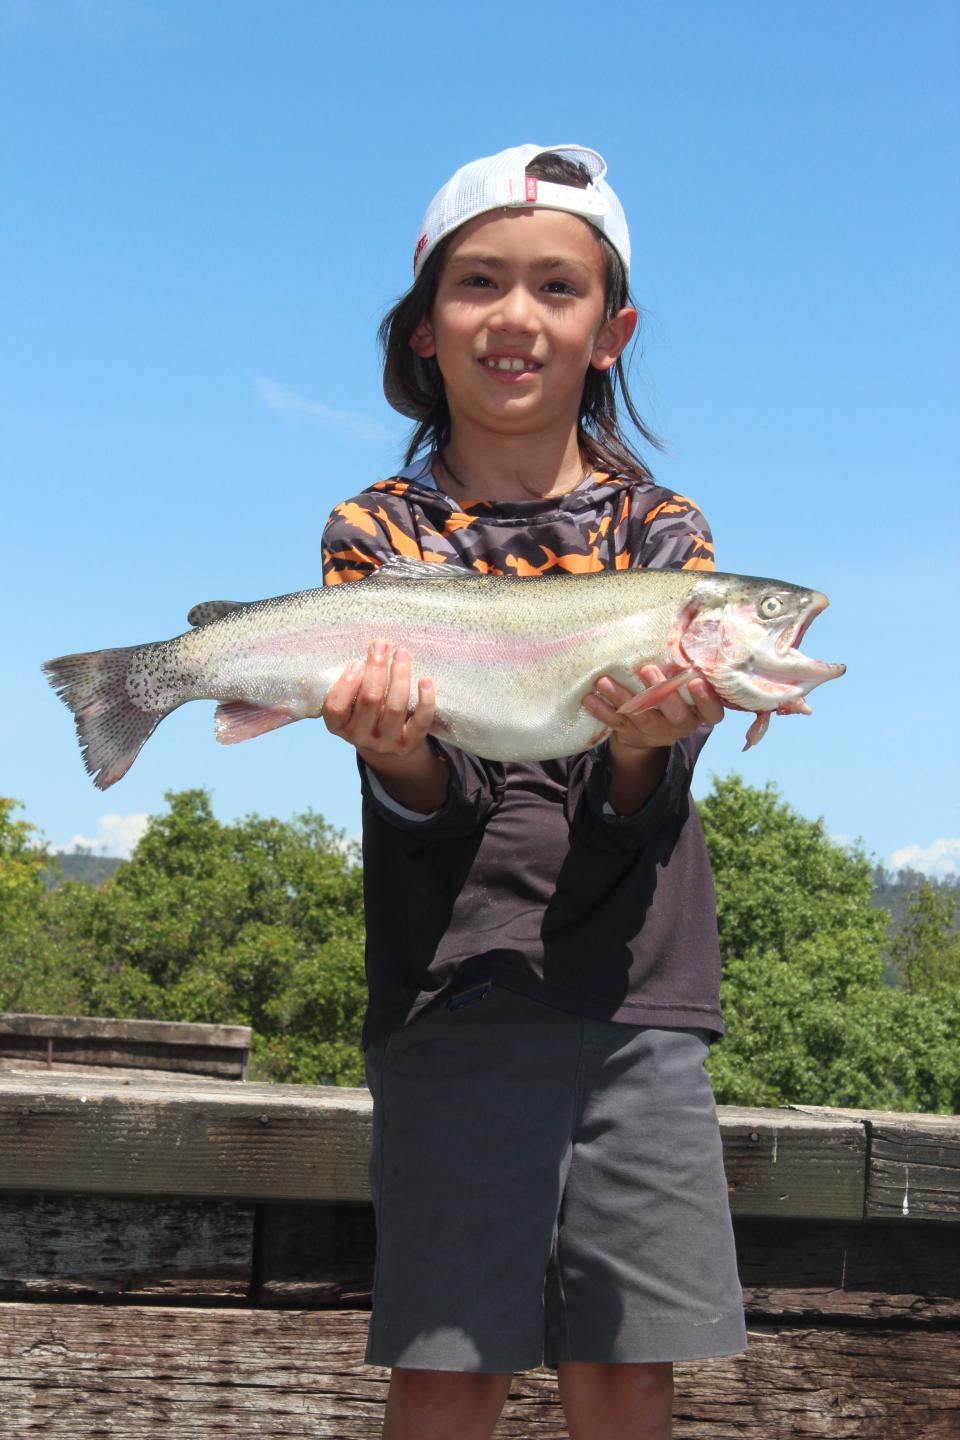 Hunter Lauren of Sacramento placed first in the youth division of the NTAC event at Lake Amador on April 23 with his 4.26 lb. cutbow.